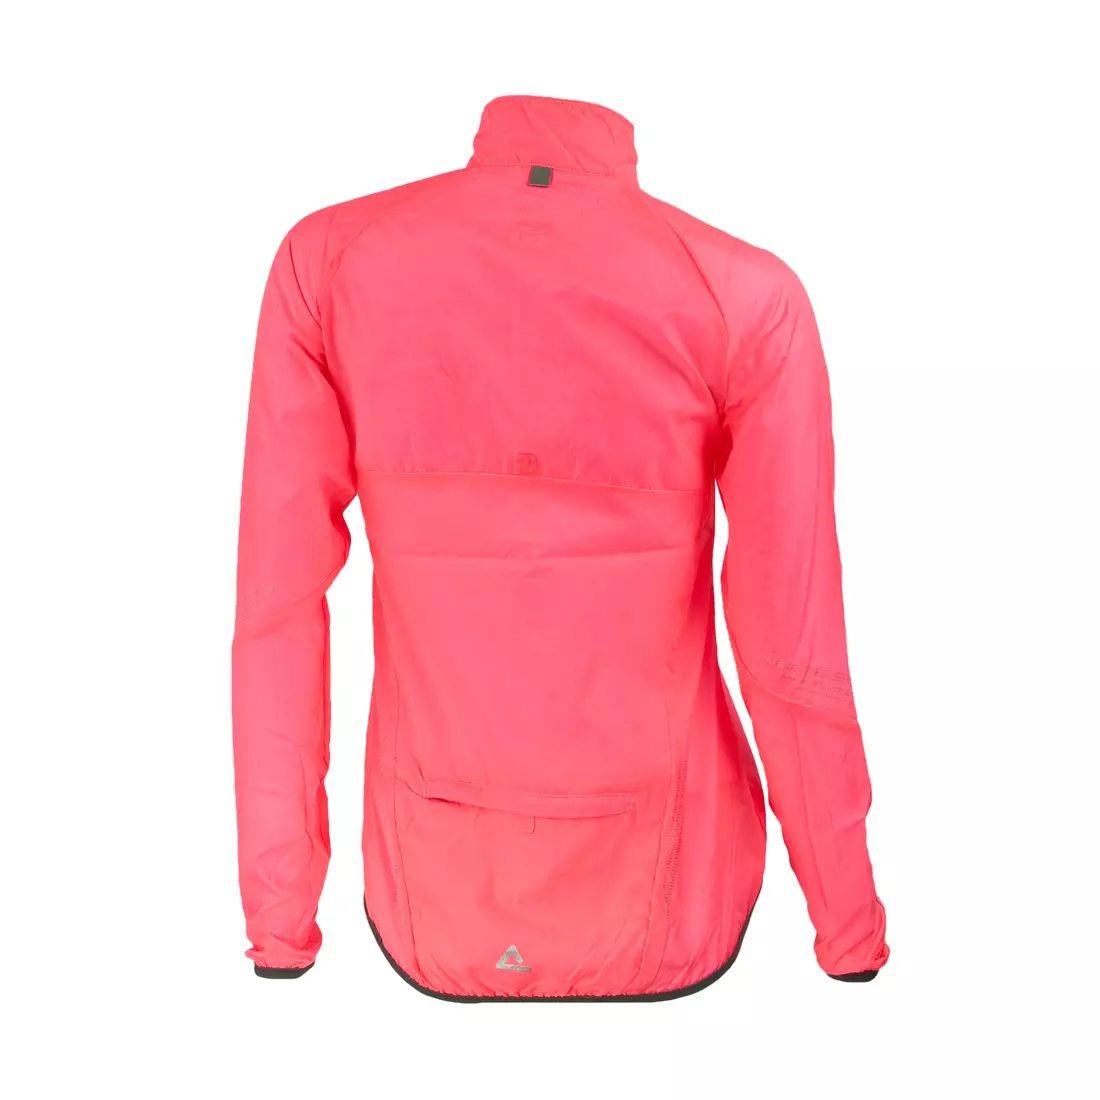 DARE2B - DWL083 - women's Clarion Windshell 72P jacket, color: Pink